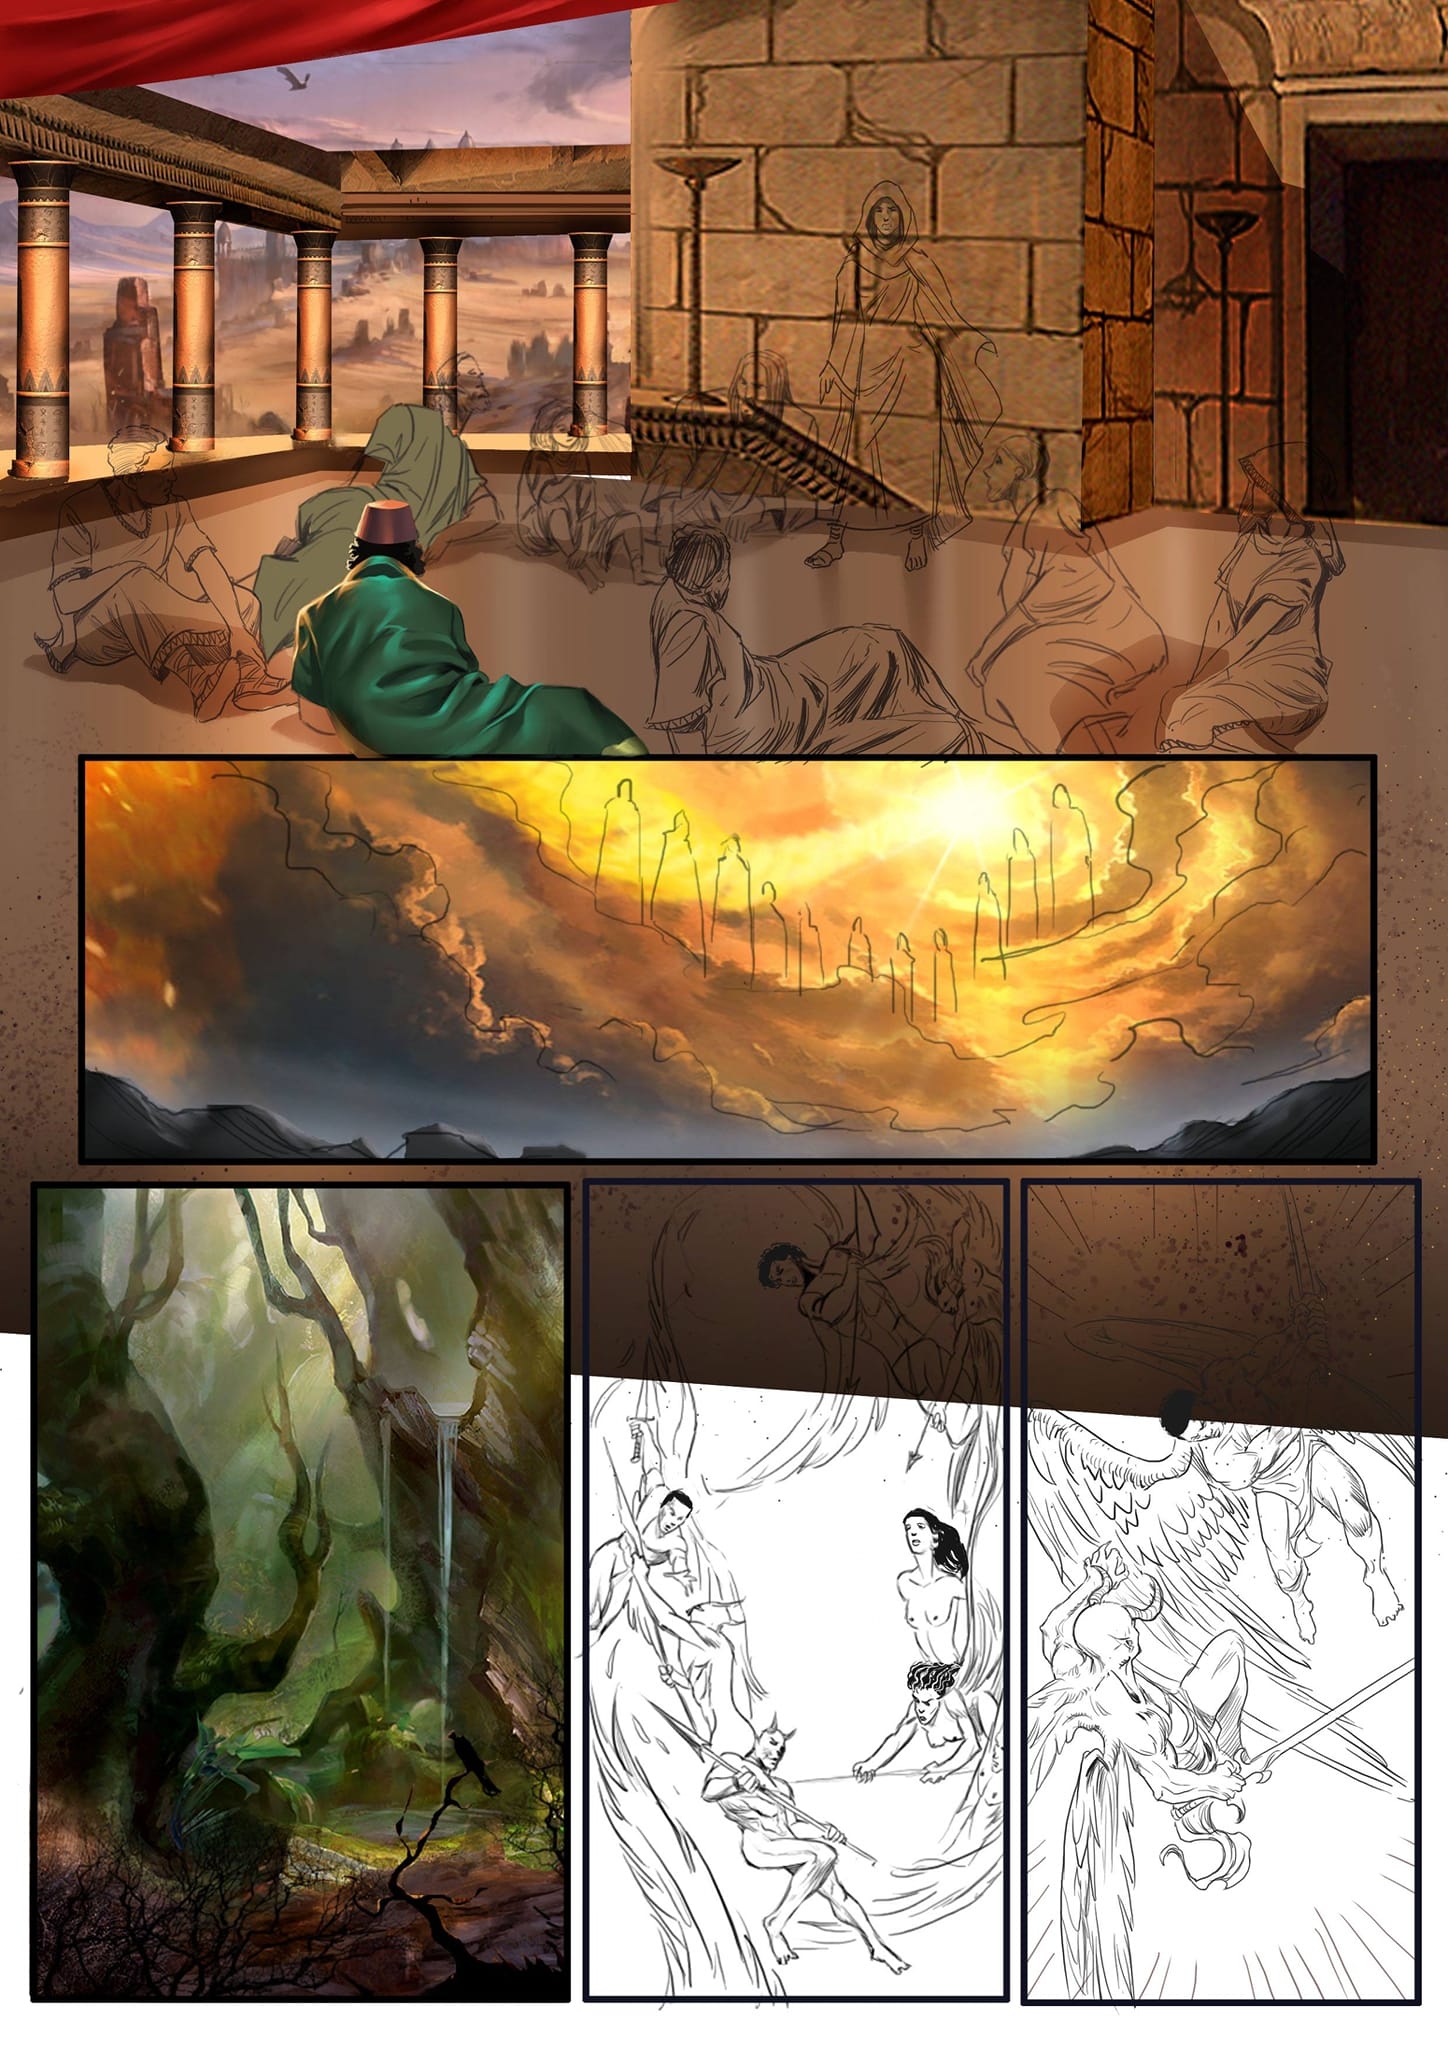 First page of Realm of spirits: Blossom of the North Star in progress.